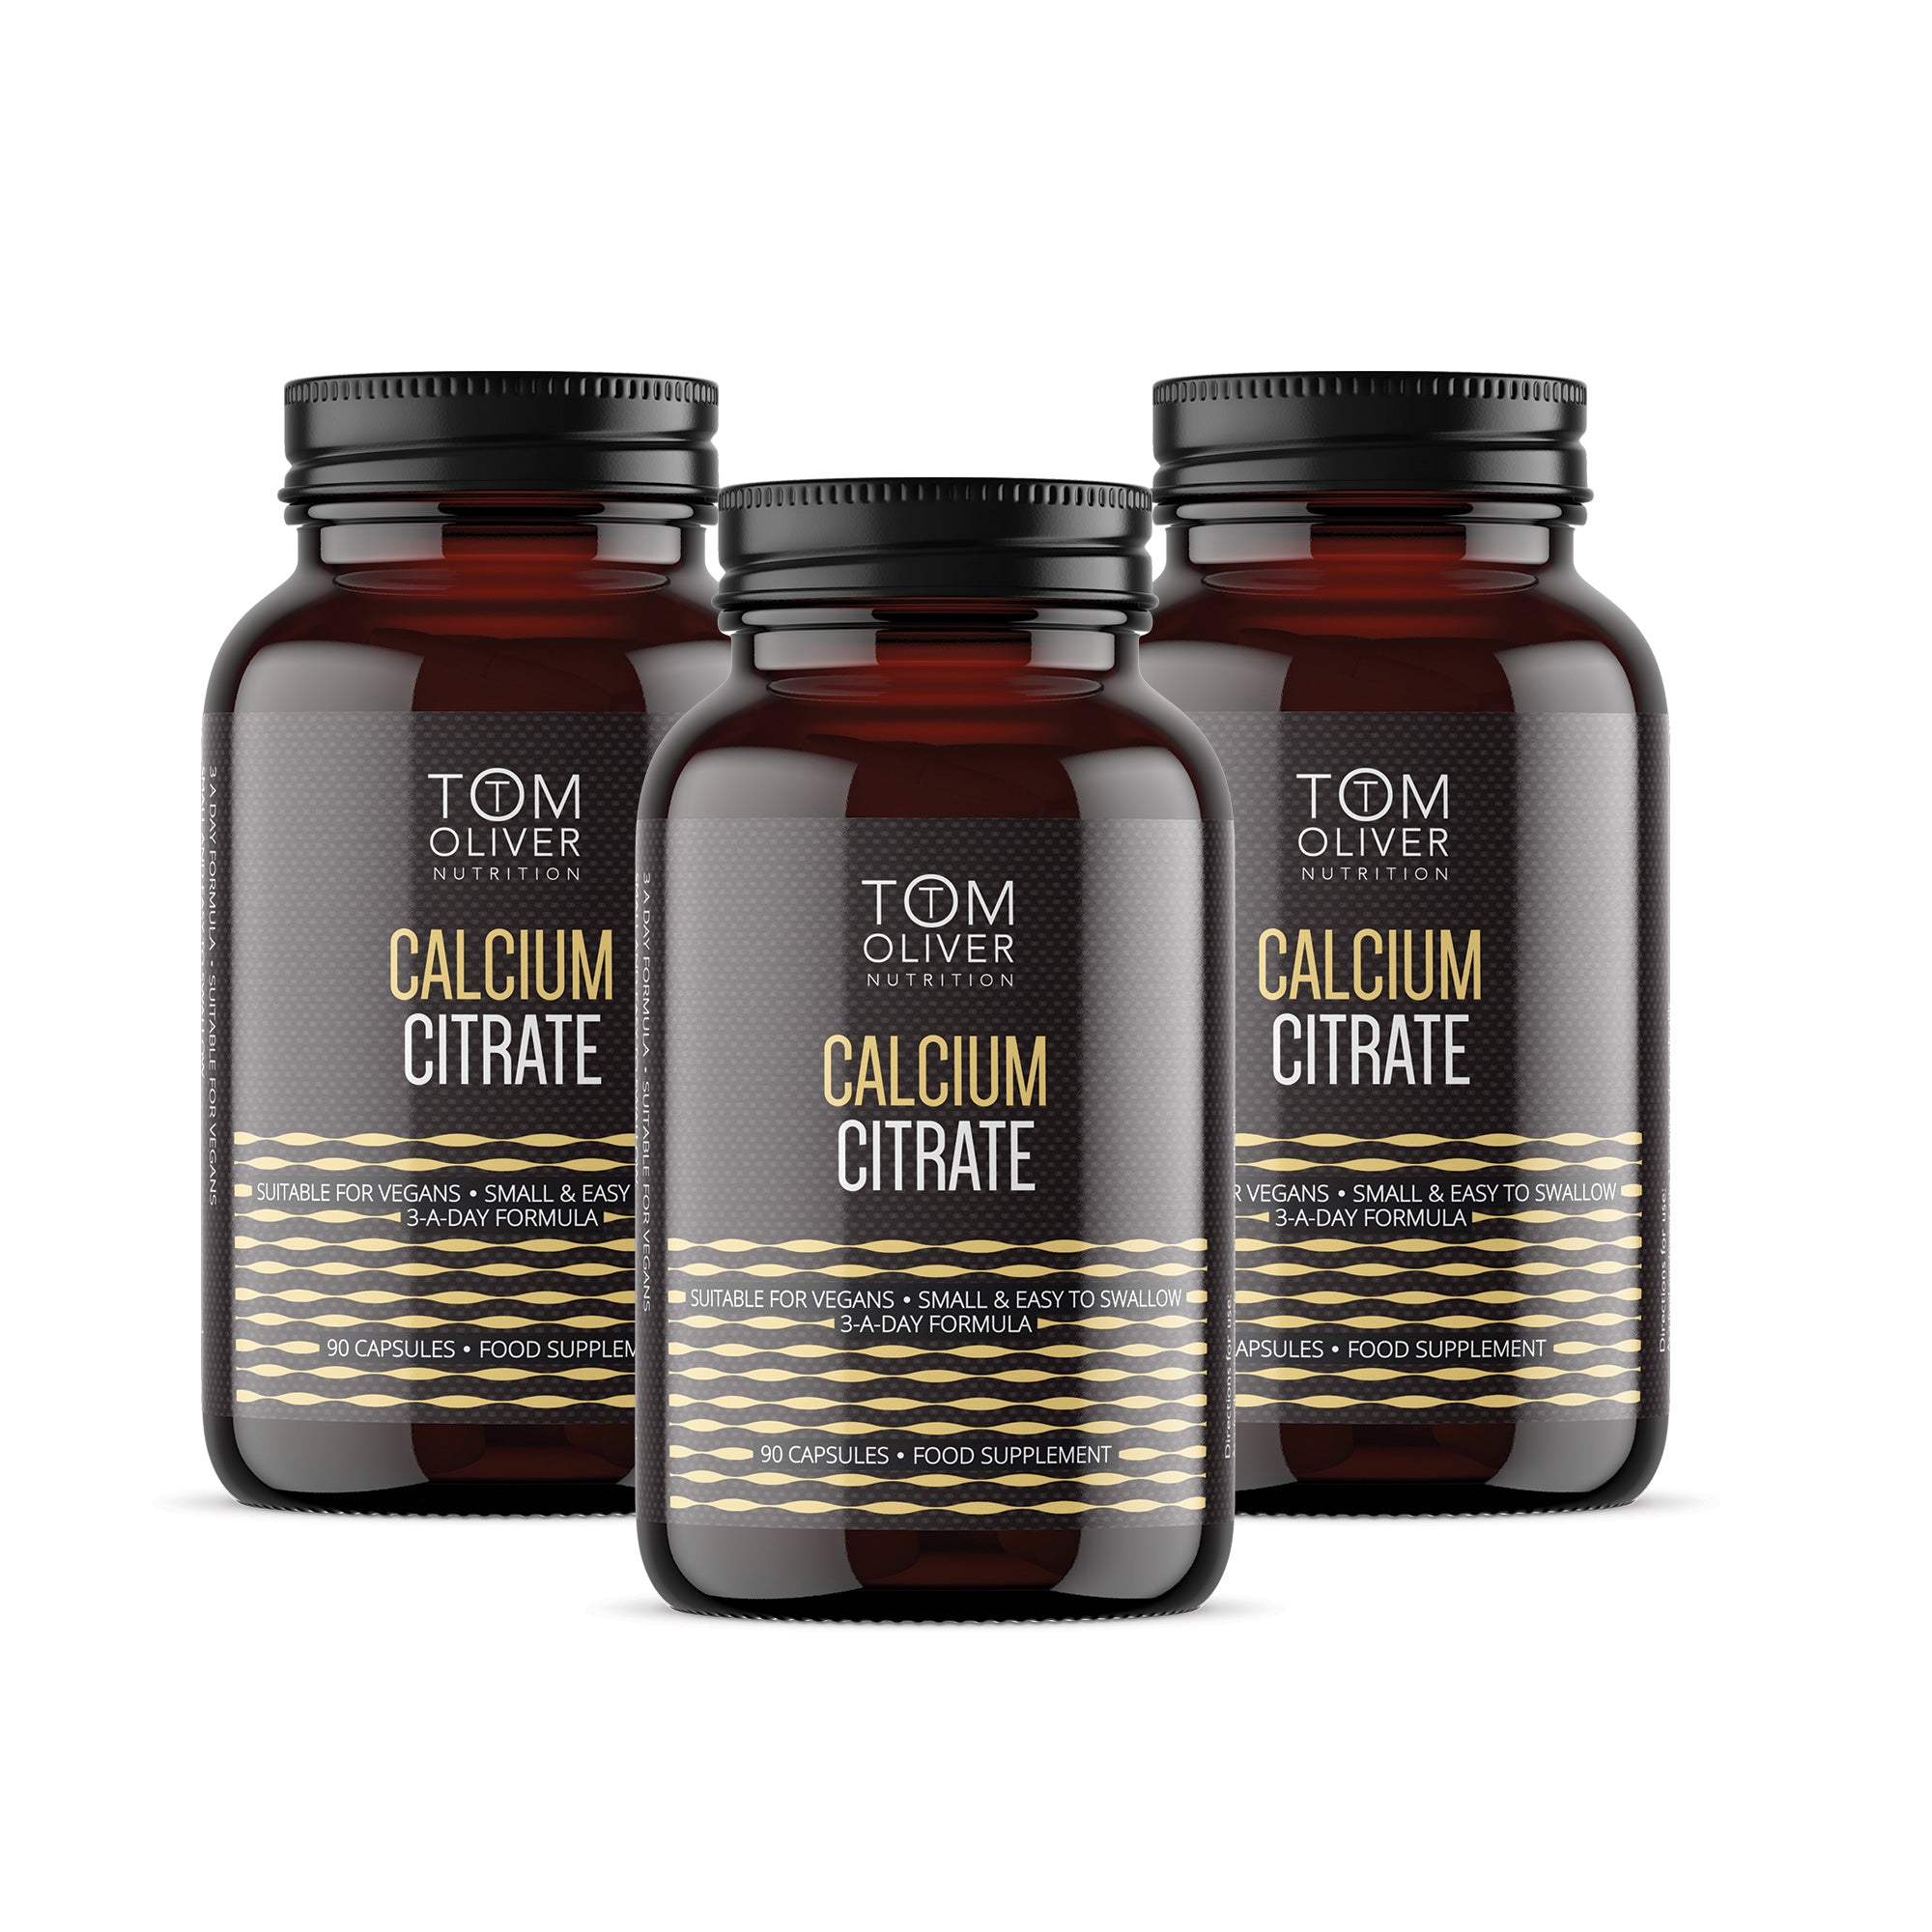 Calcium Citrate Offer Pack (3 Bottles)